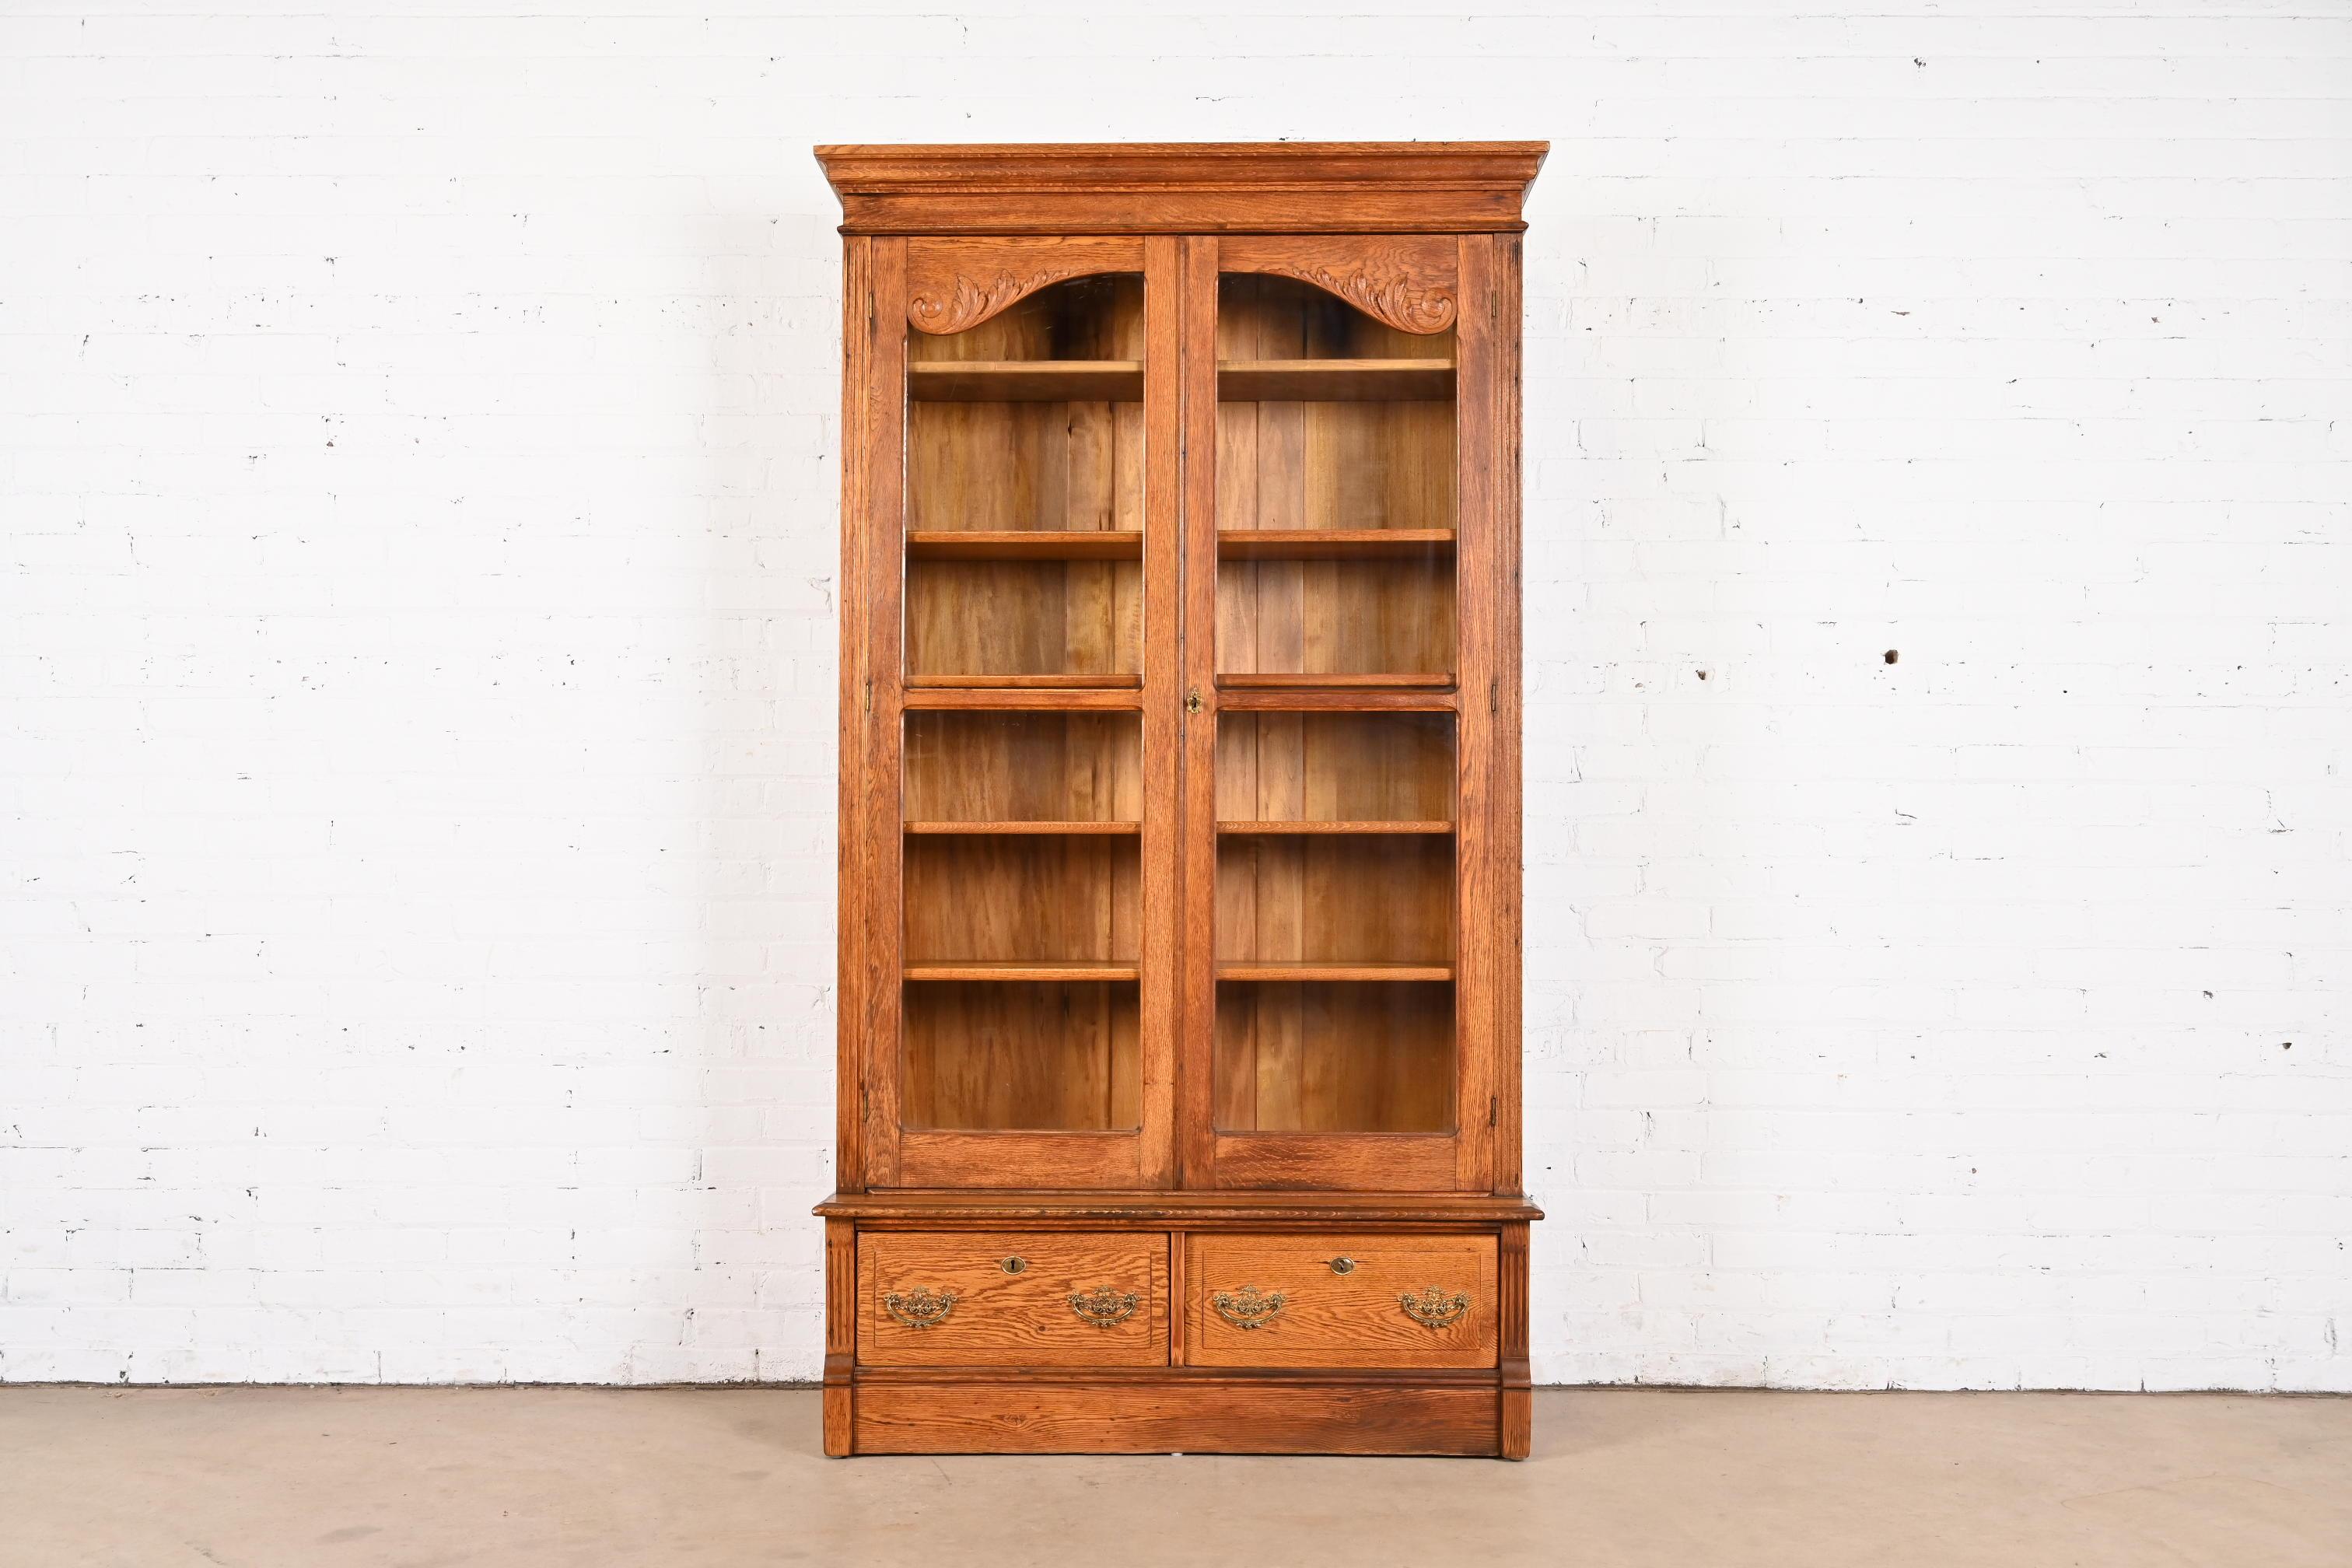 A gorgeous antique Late Victorian or Arts & Crafts bookcase

USA, Circa 1900

Carved oak, with glass front doors, and brass hardware. Cabinet doors and drawers lock. Two keys included.

Measures: 44.5